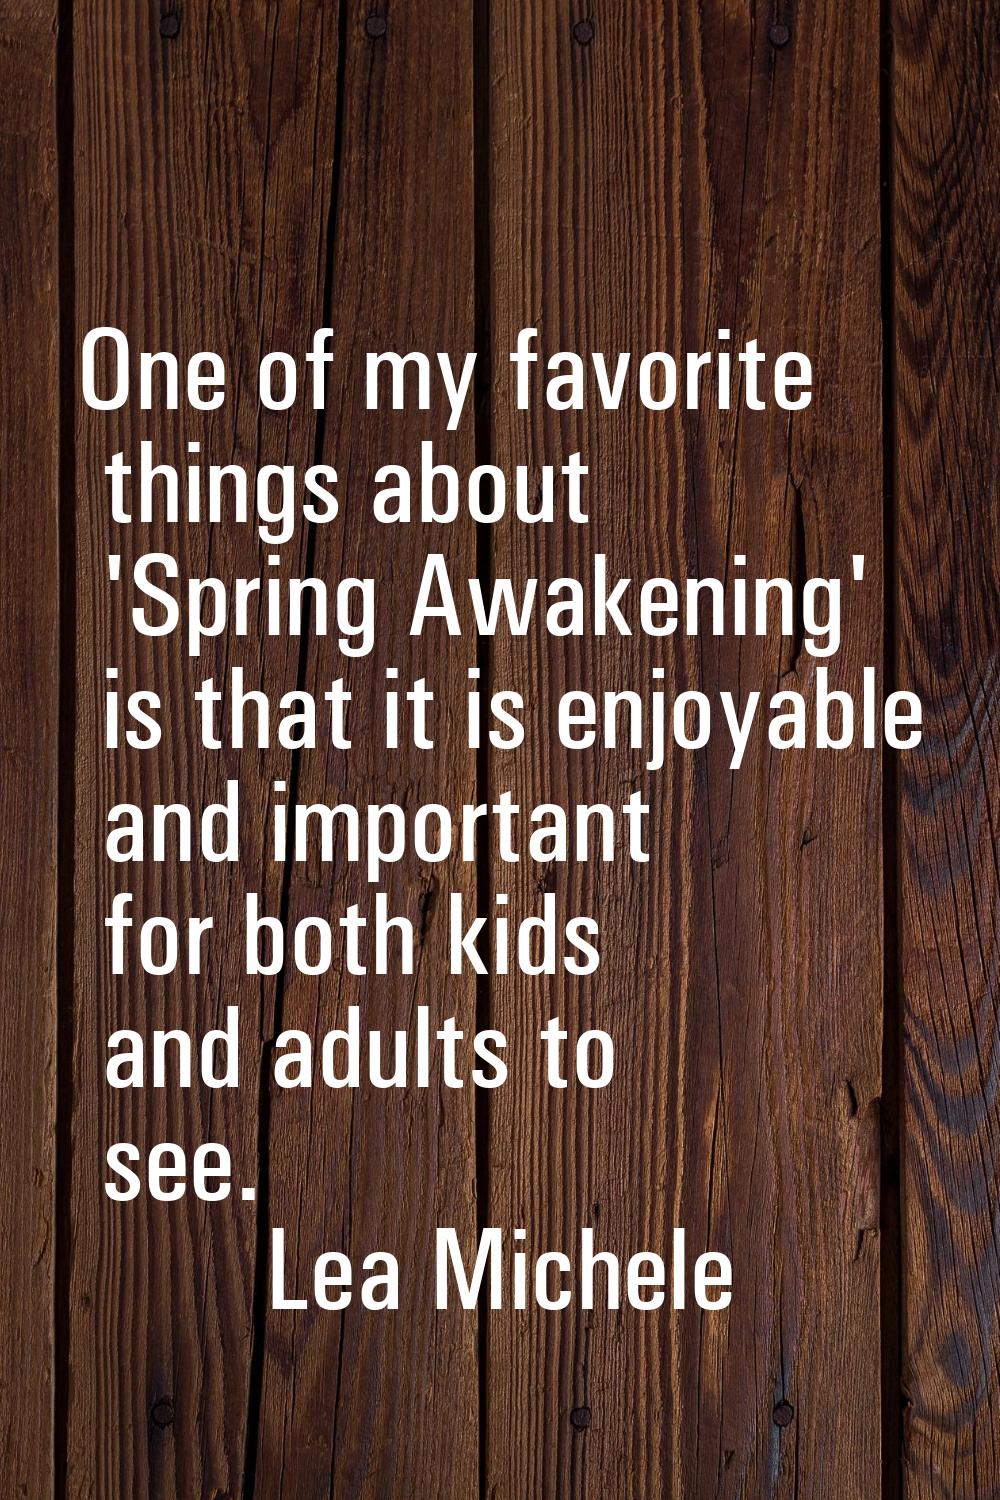 One of my favorite things about 'Spring Awakening' is that it is enjoyable and important for both k